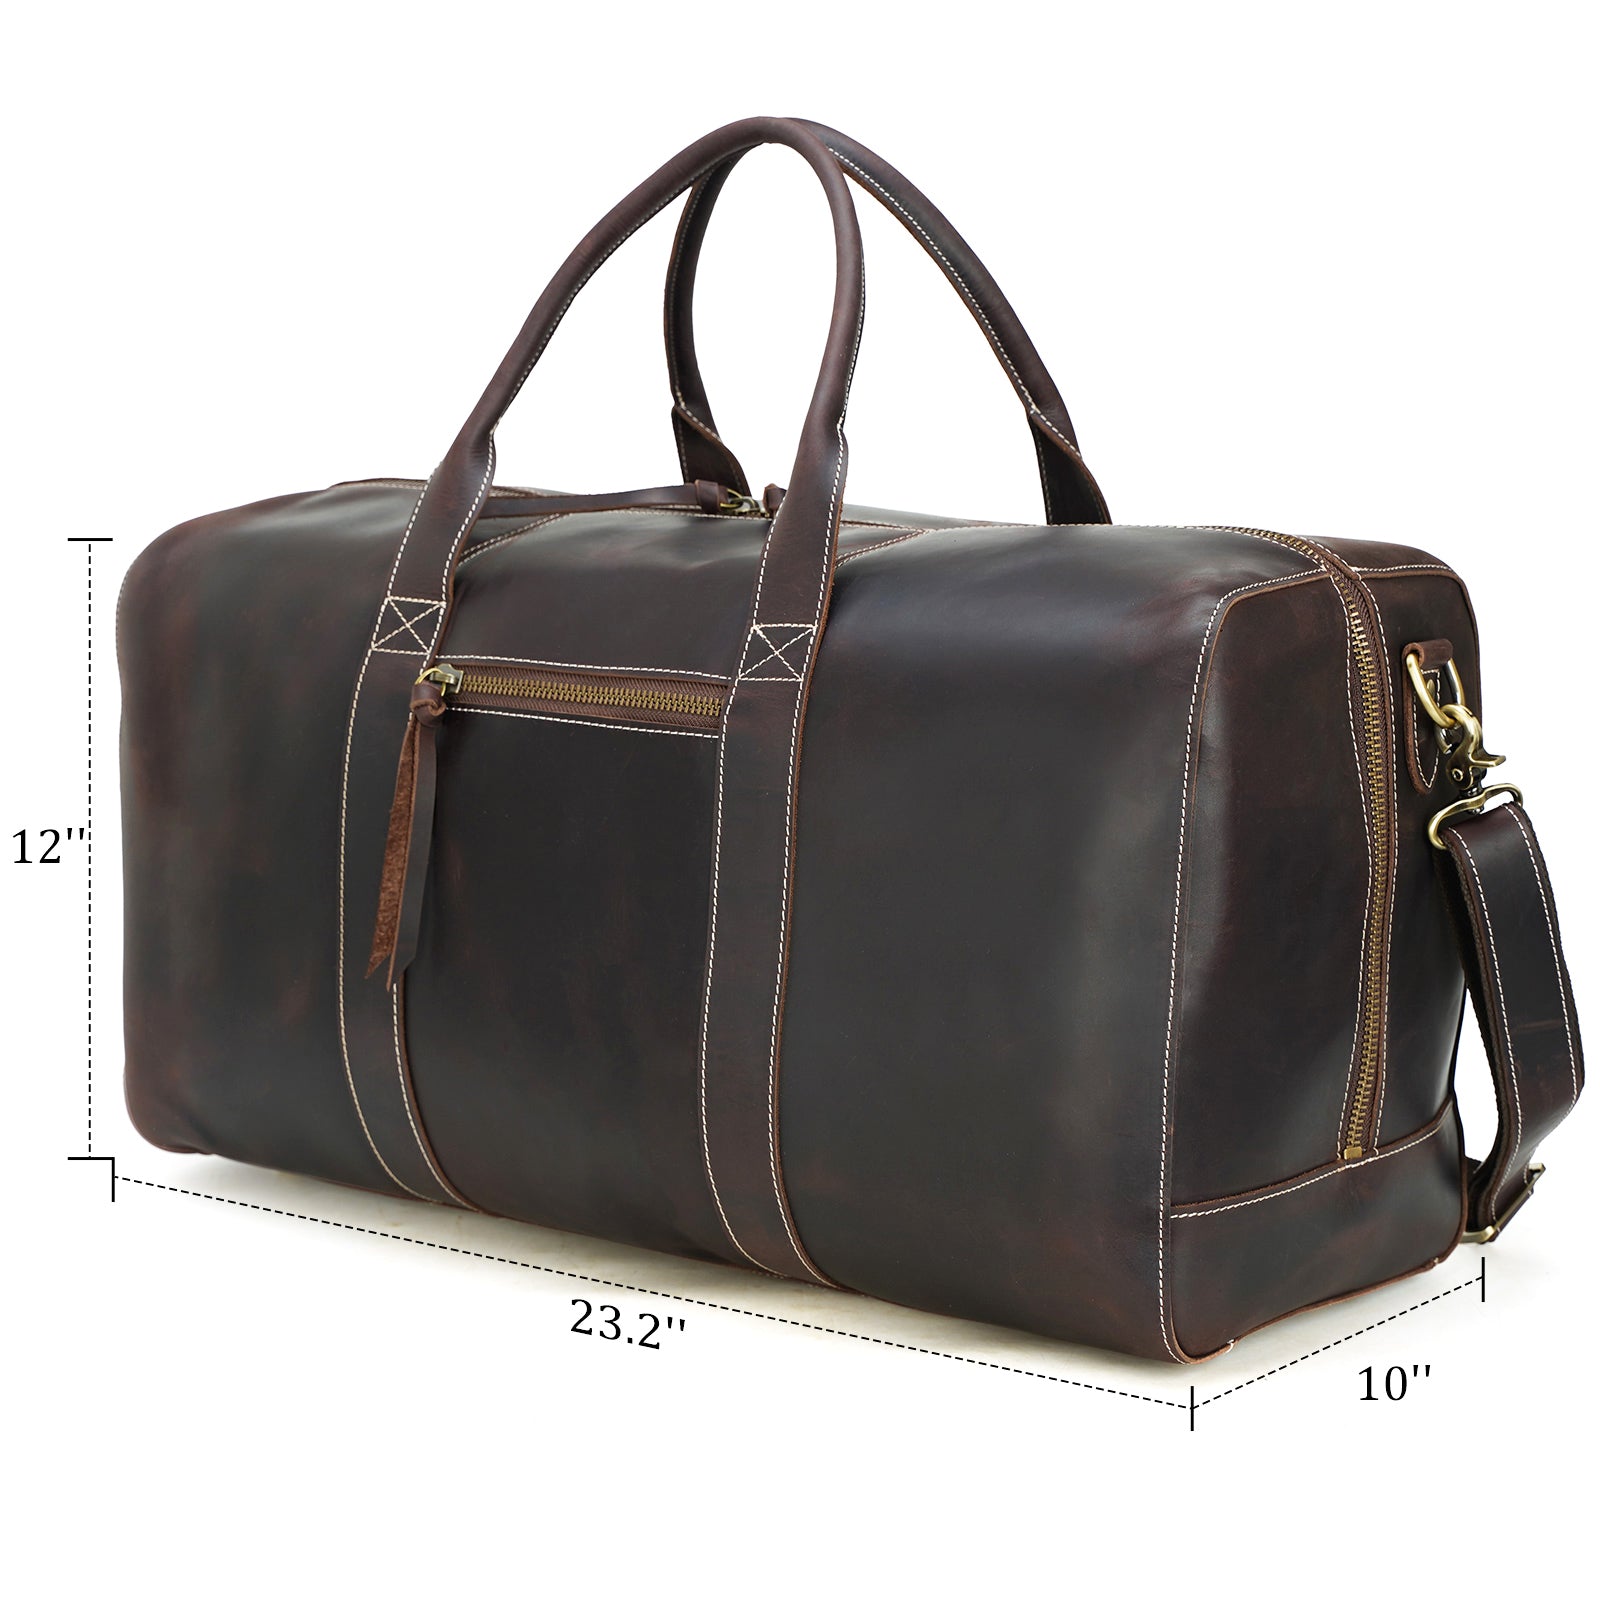 Men's Duffle & Travel Bags Collection